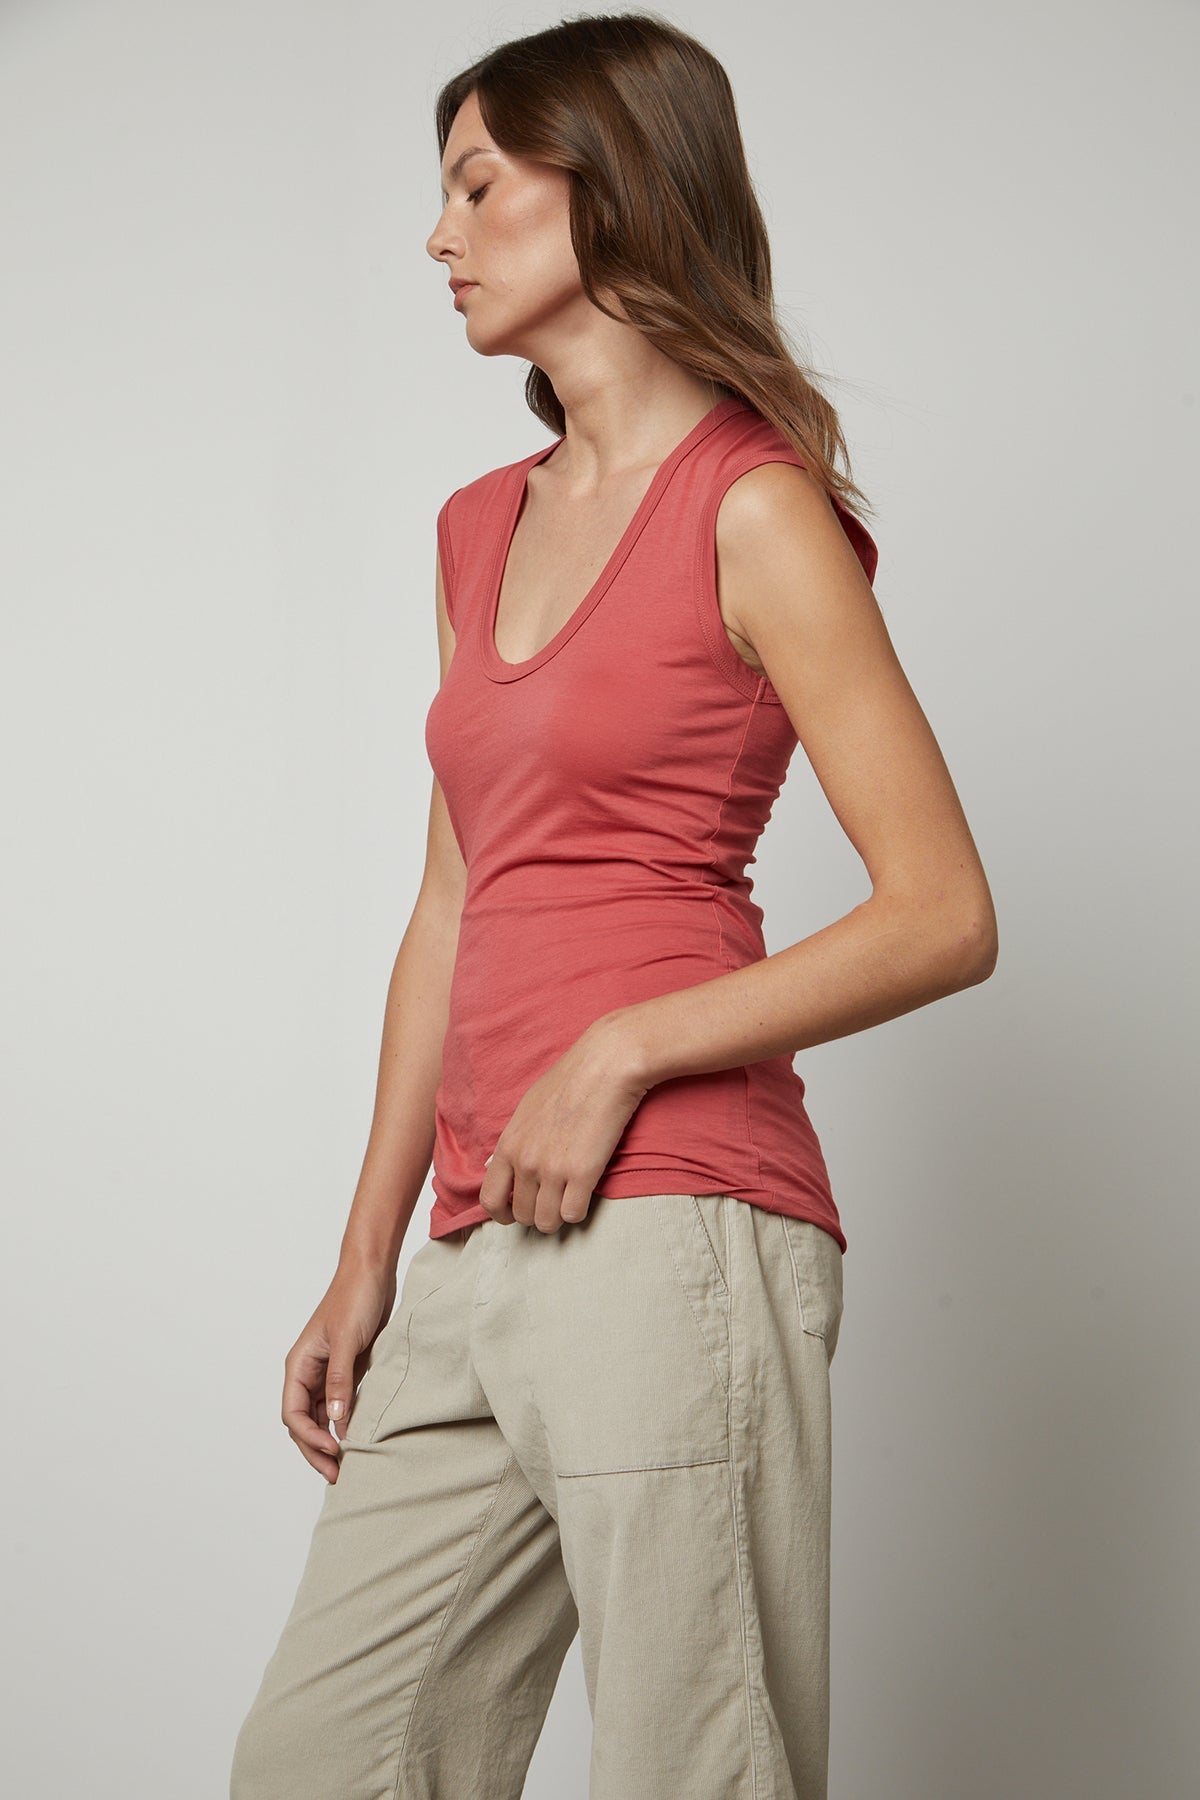 A woman wearing an ESTINA GAUZY WHISPER FITTED TANK TOP by Velvet by Graham & Spencer and khaki pants.-35782798147777